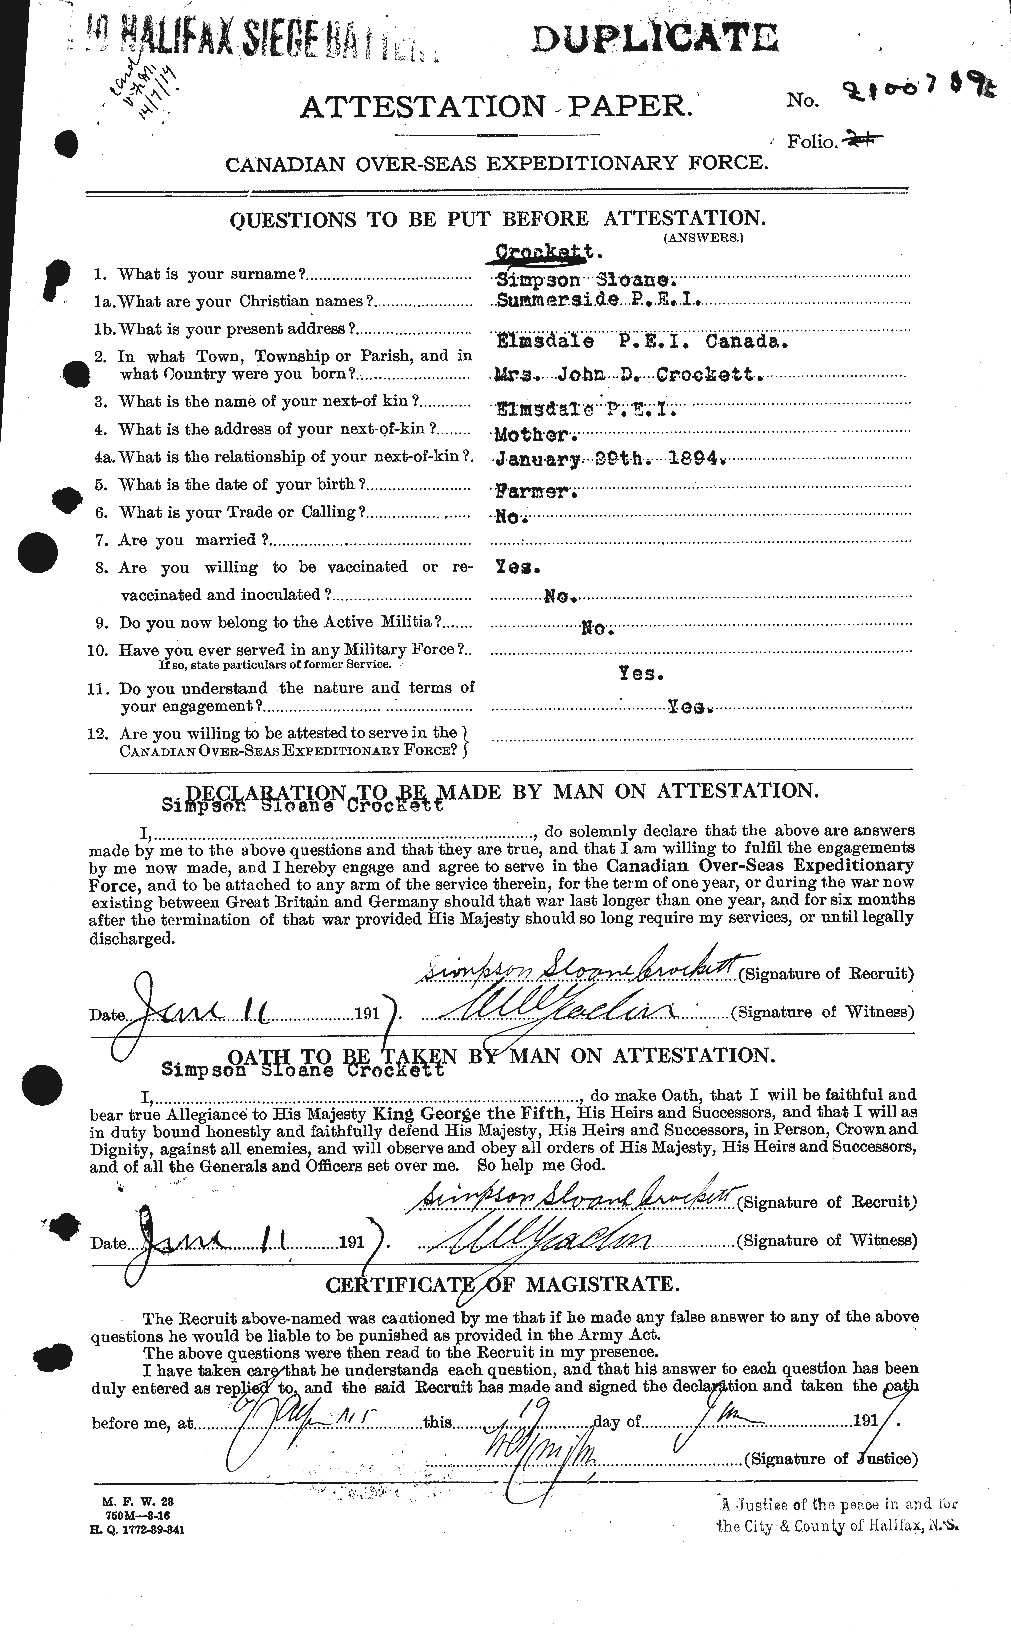 Personnel Records of the First World War - CEF 064523a